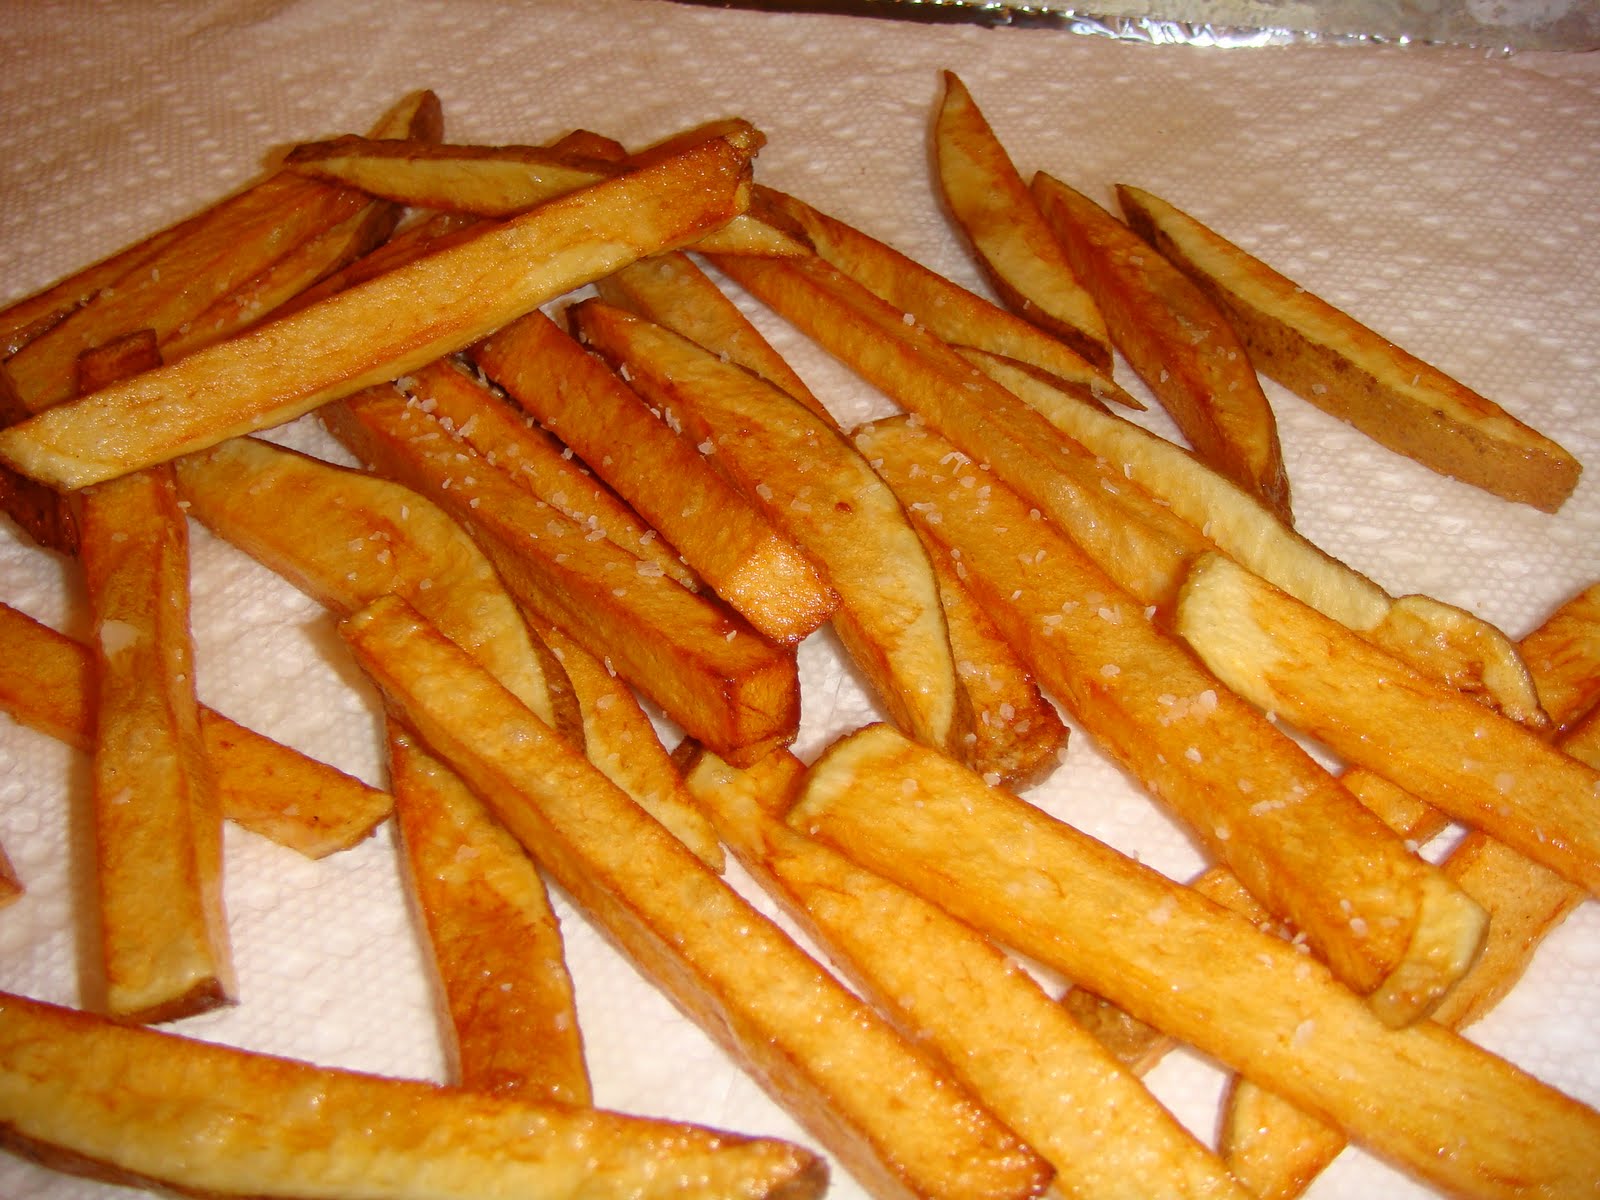 Our Blissfully Delicious Life: Homemade French Fries